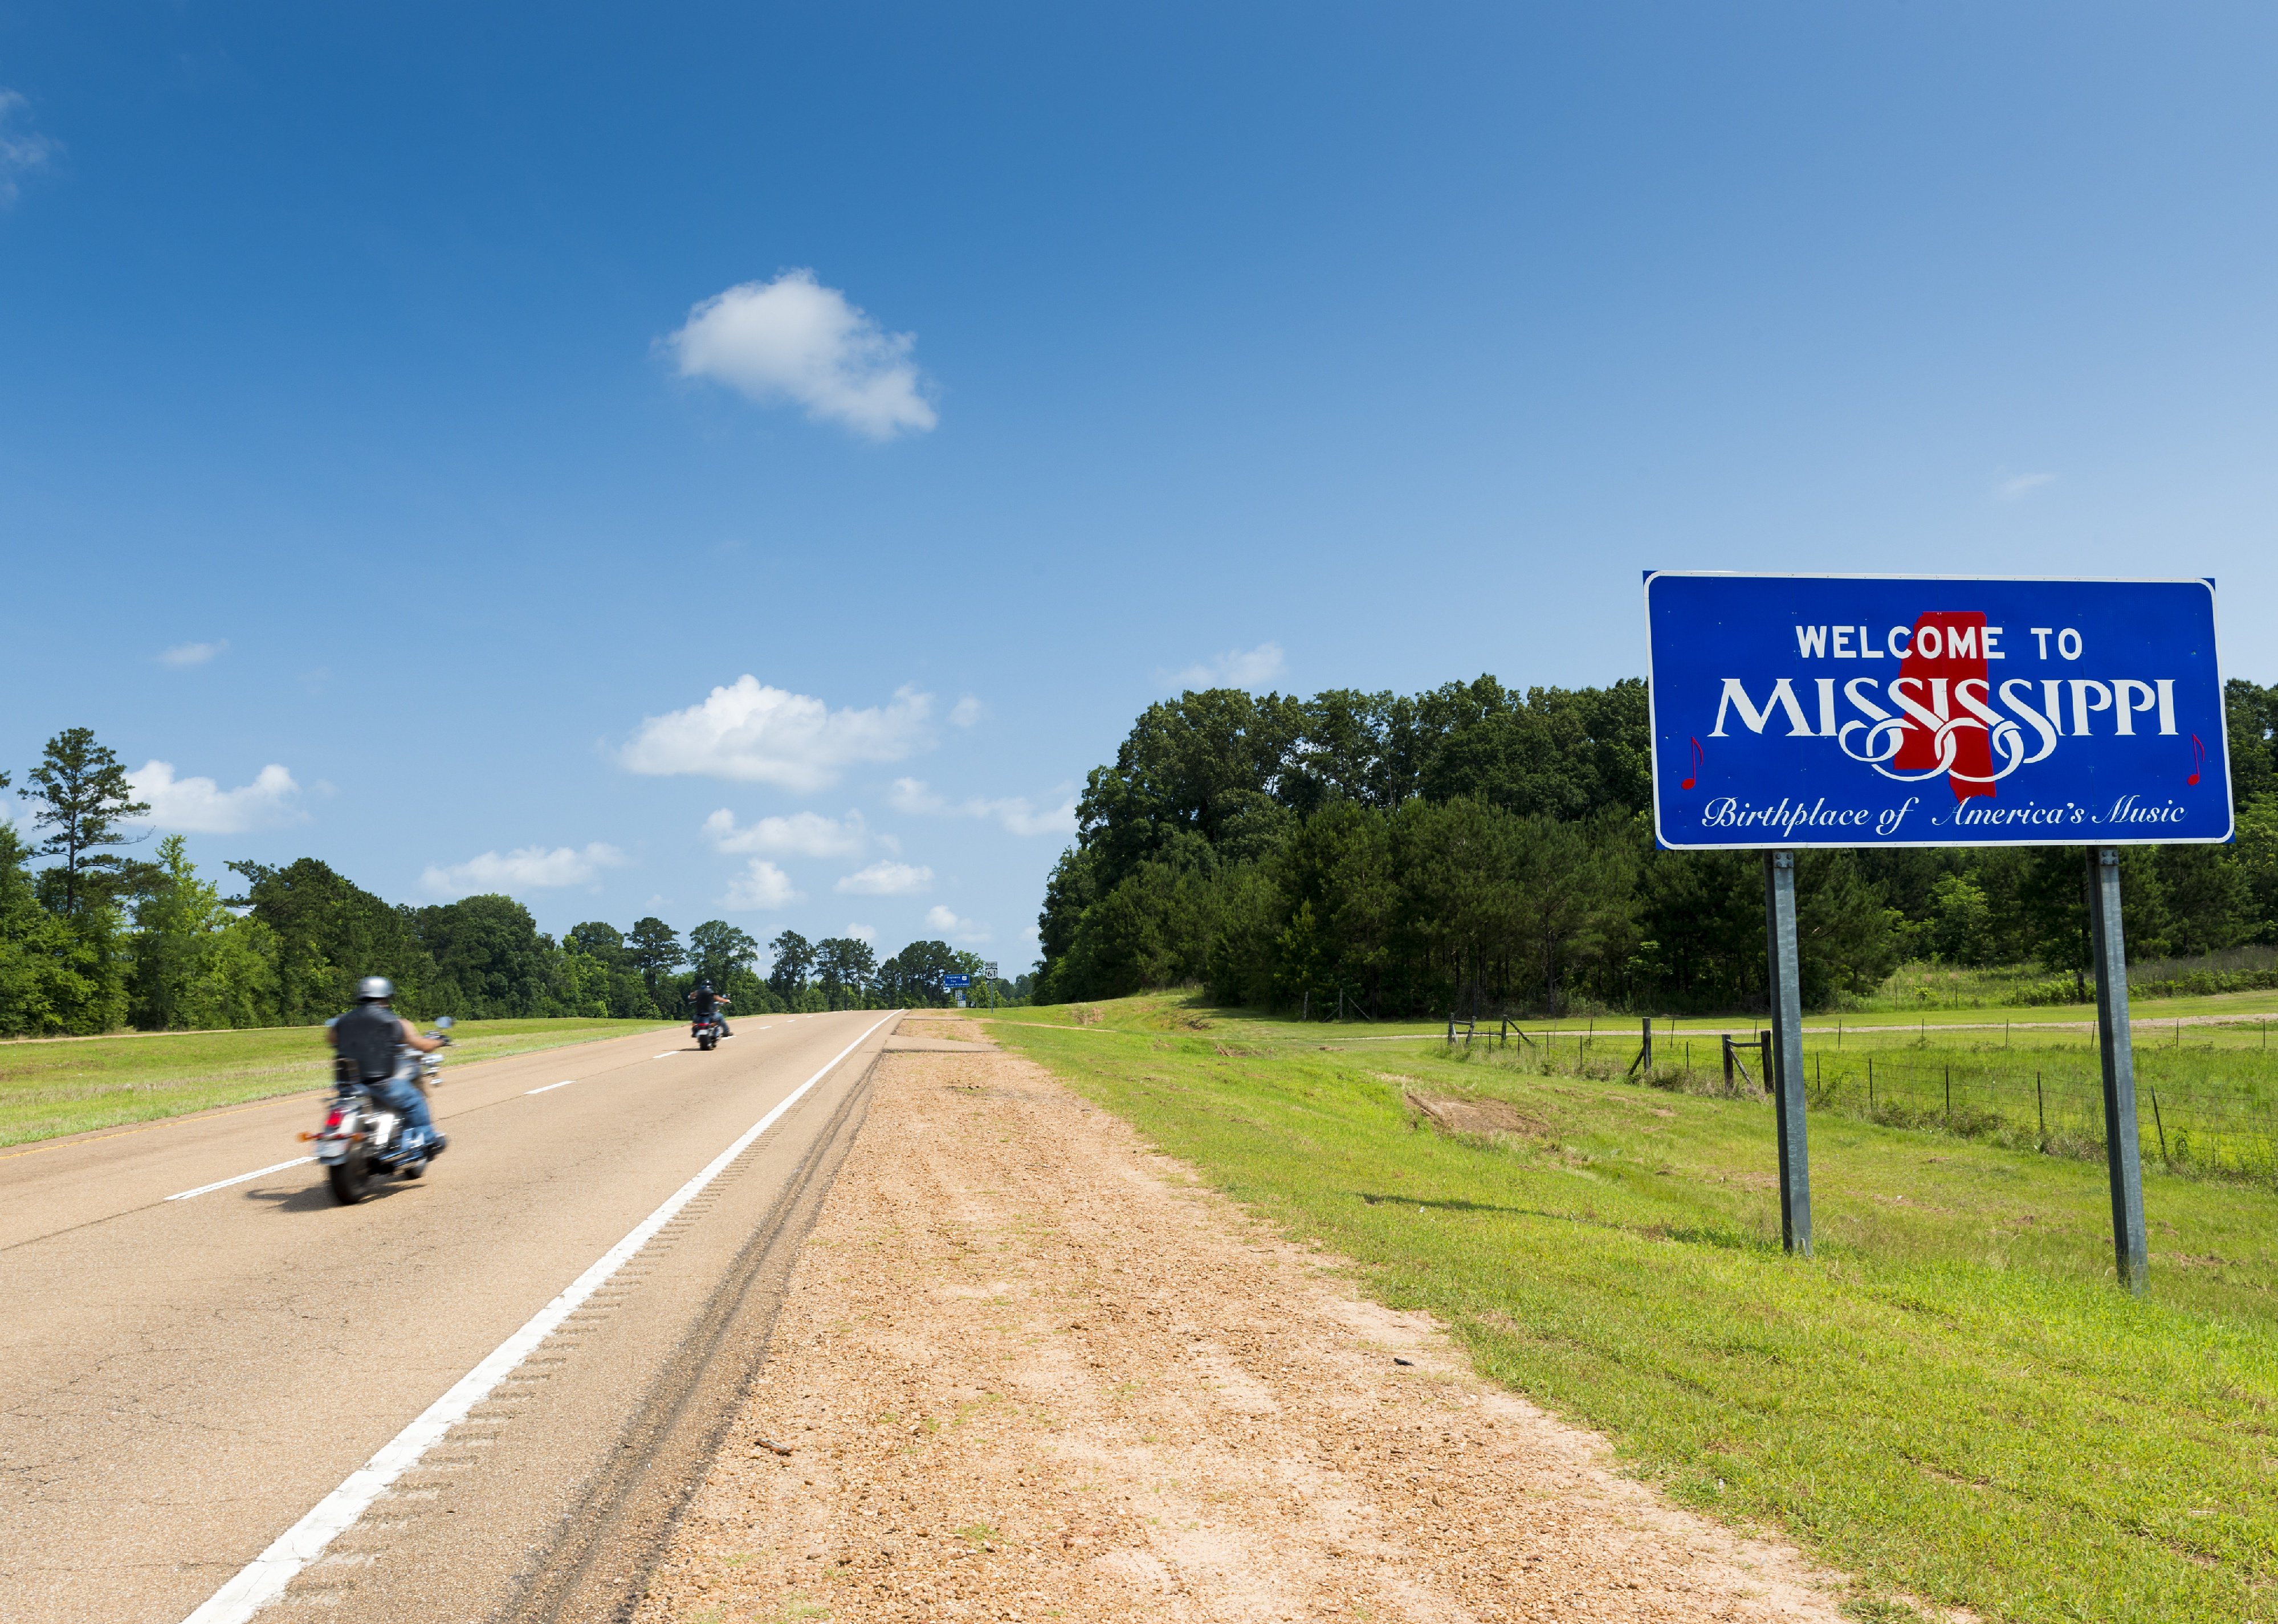 Two motorcycles passing by the Mississippi State welcome sign.